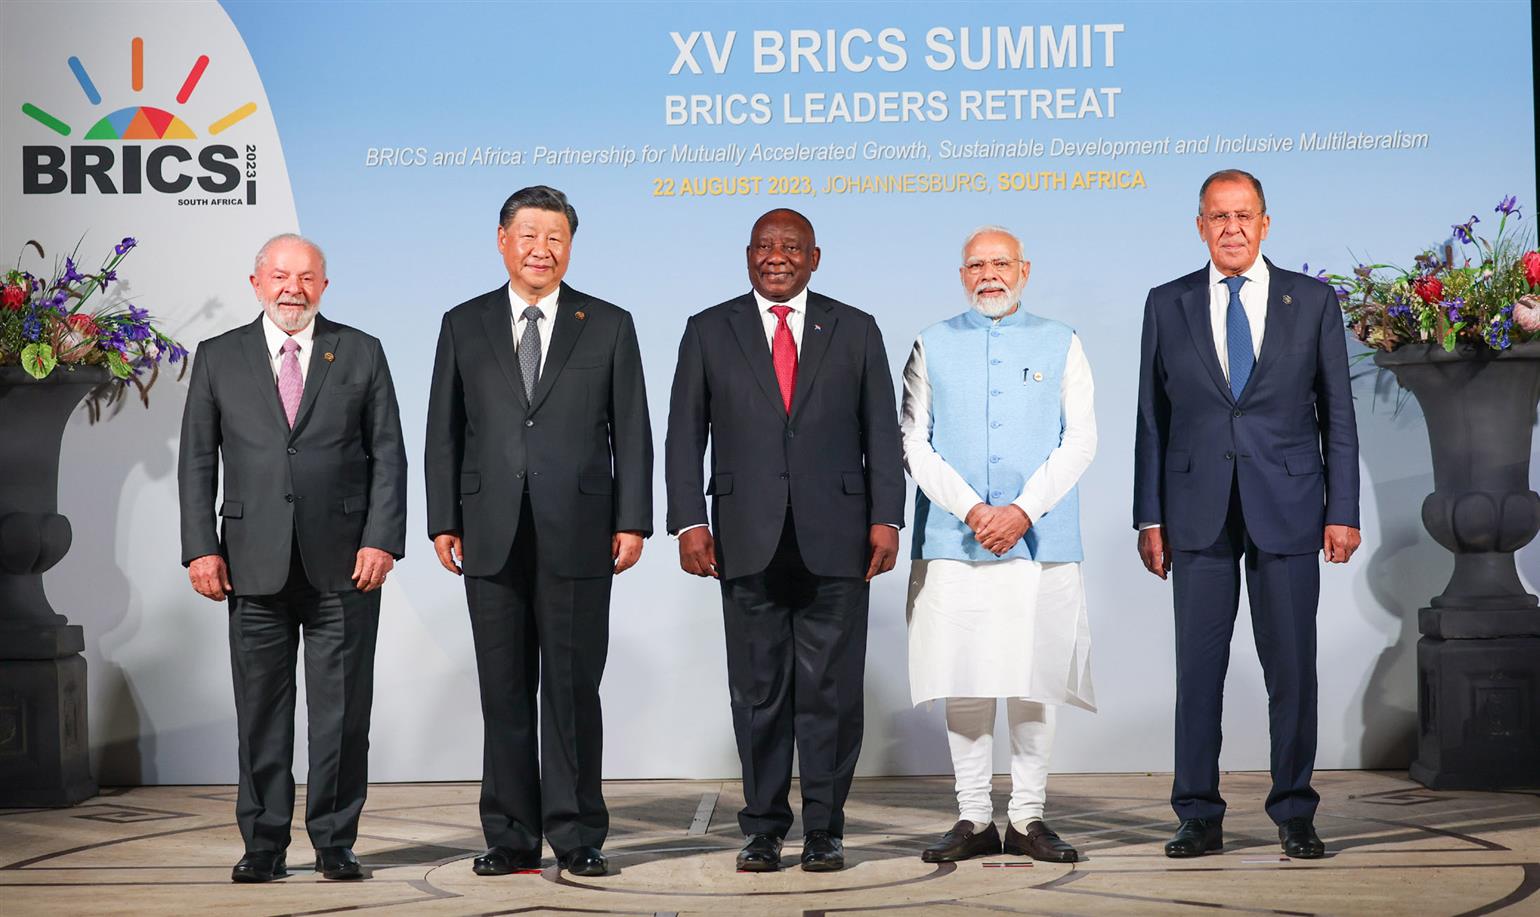 The leaders of four BRICS countries, Lula, Xi Jinping, Cyril Ramaphosa with Russian Foreign Minister Sergey Lavrov